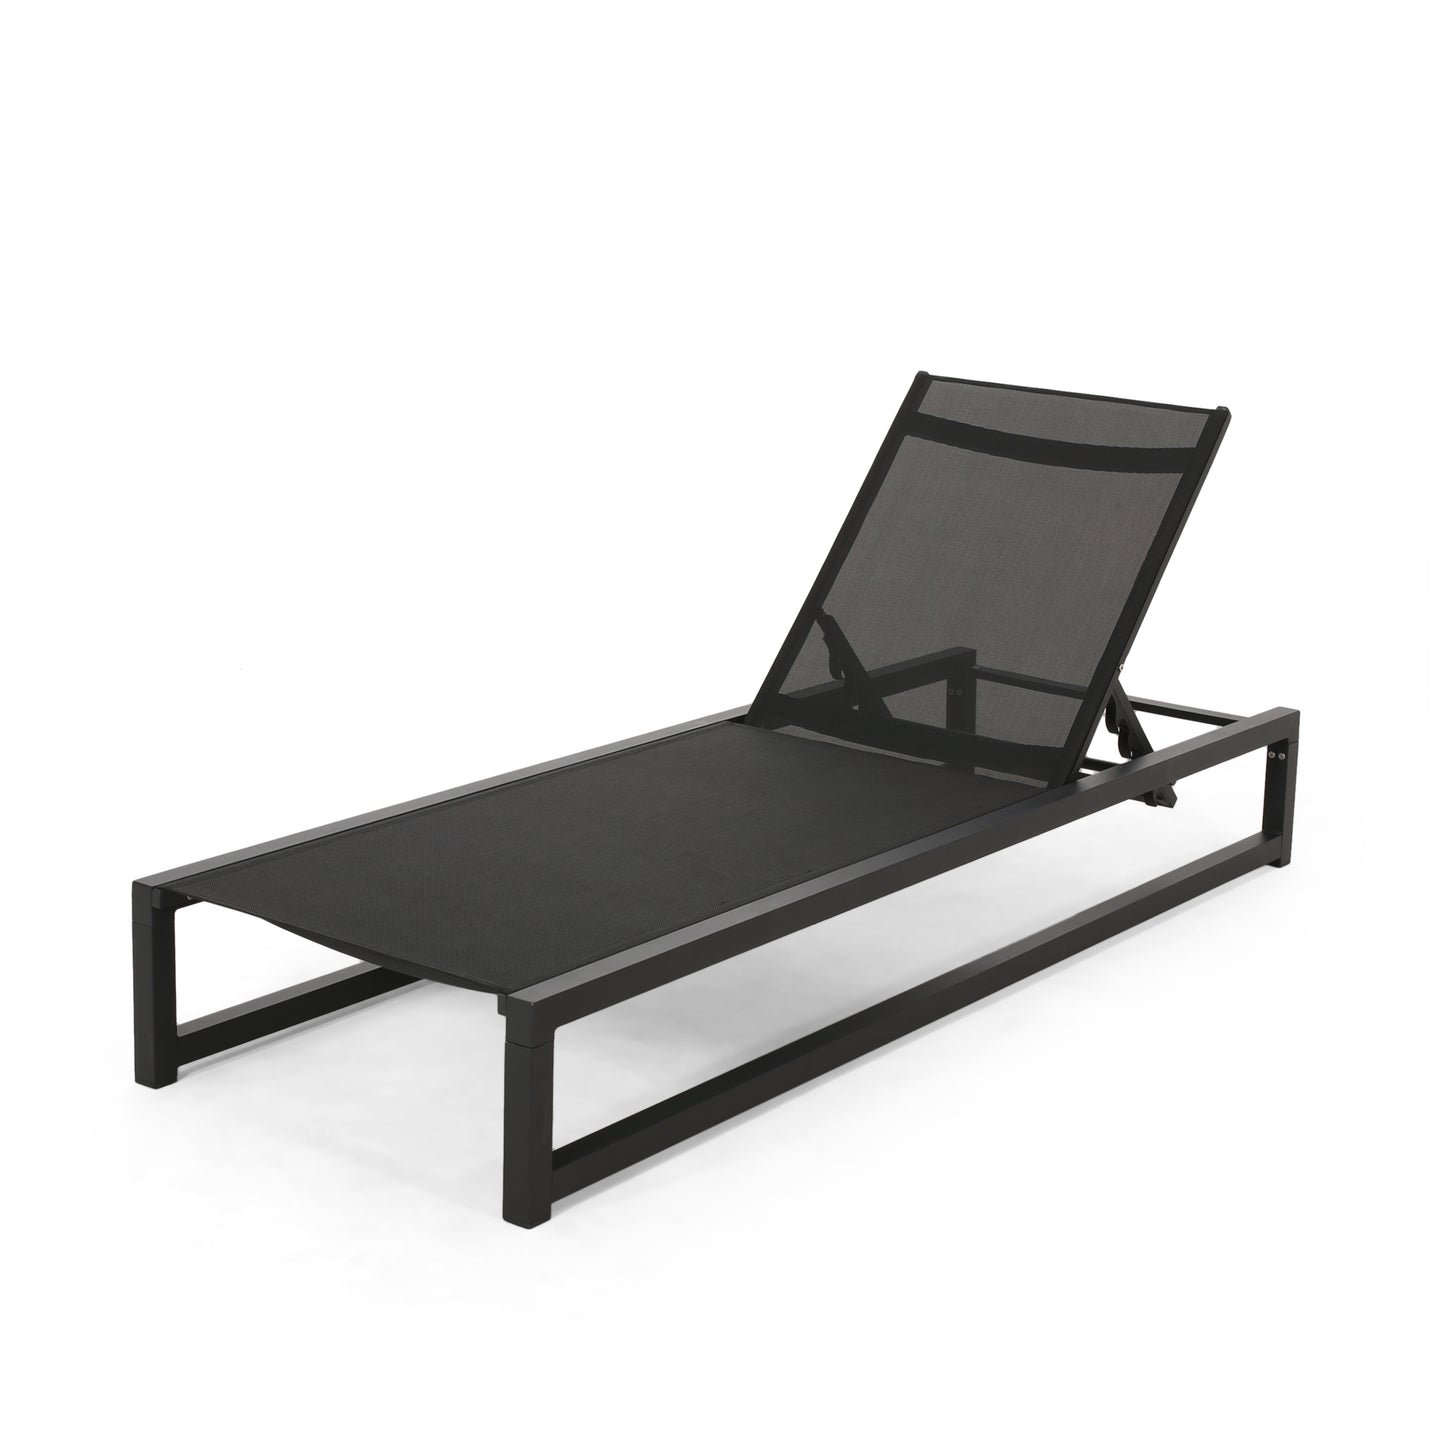 Moderna Outdoor Aluminum Chaise Lounge Set with C-Shaped End Table